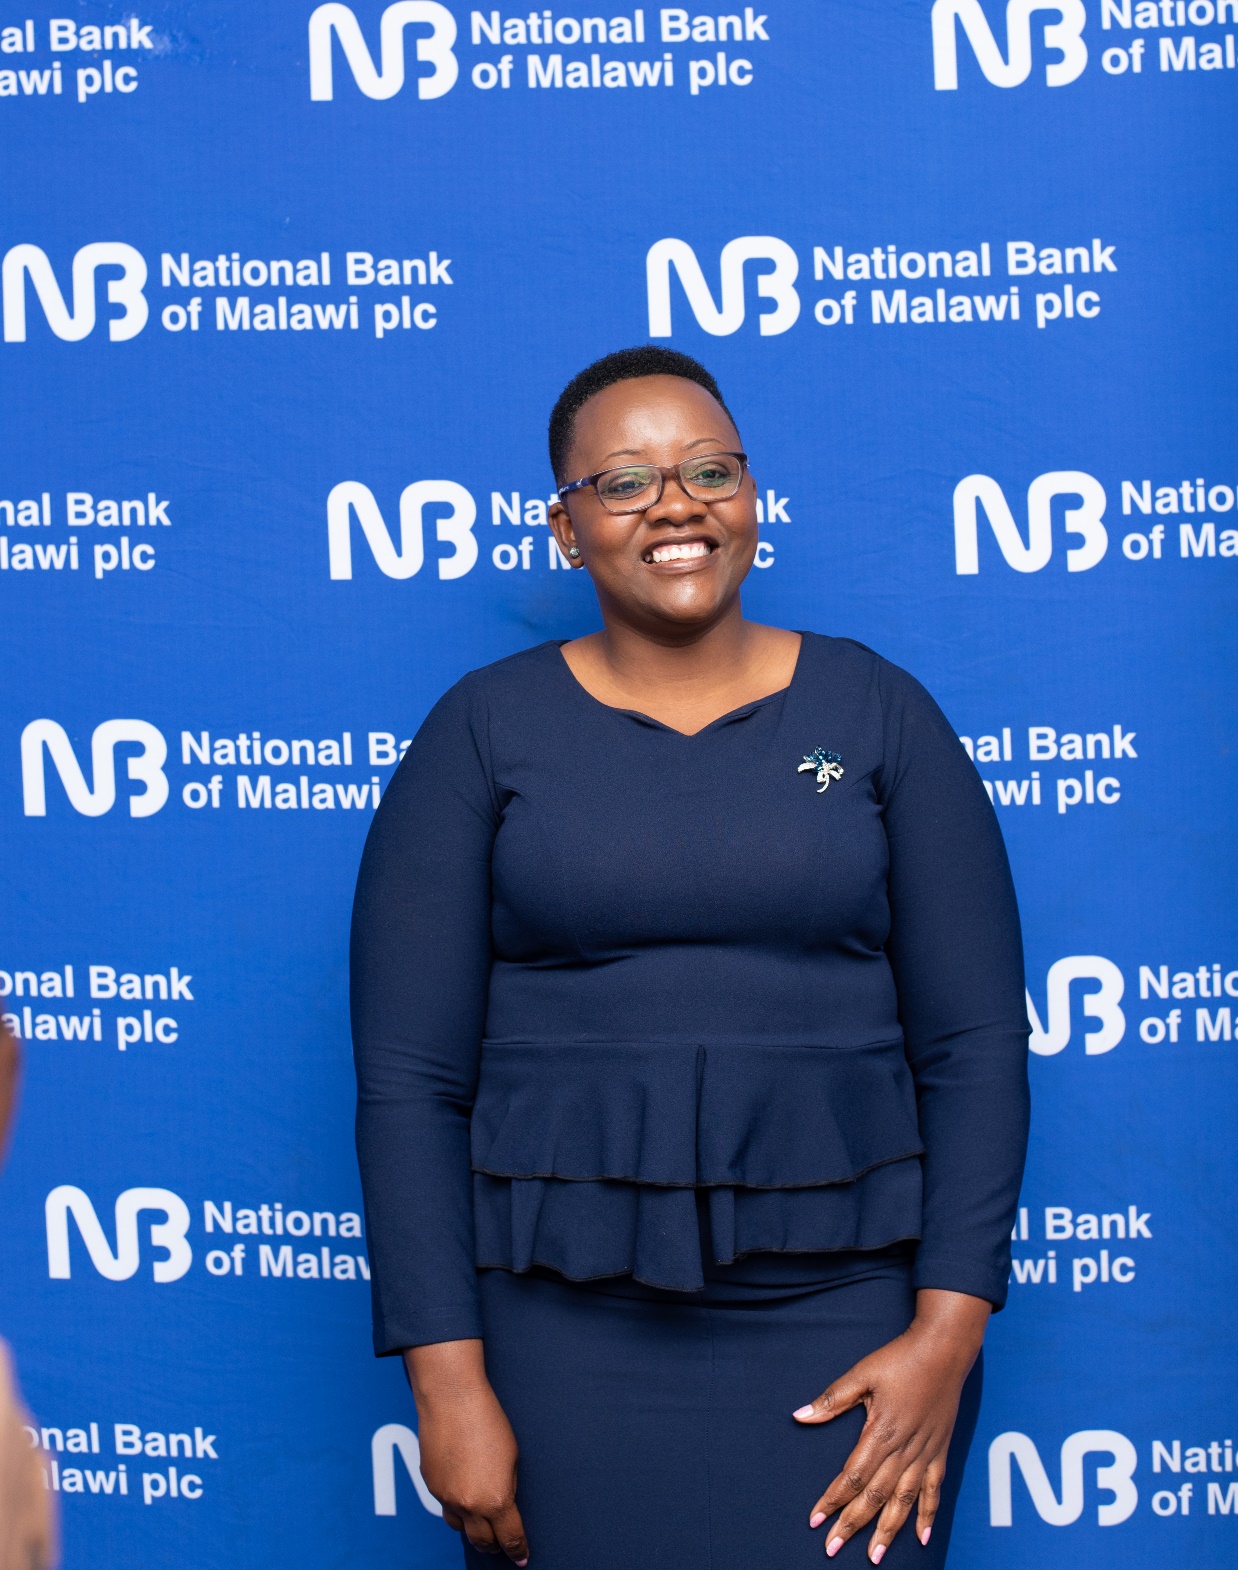 NBM Henderson Street Service Centre Manager Tamara Mtuwa who launched the product